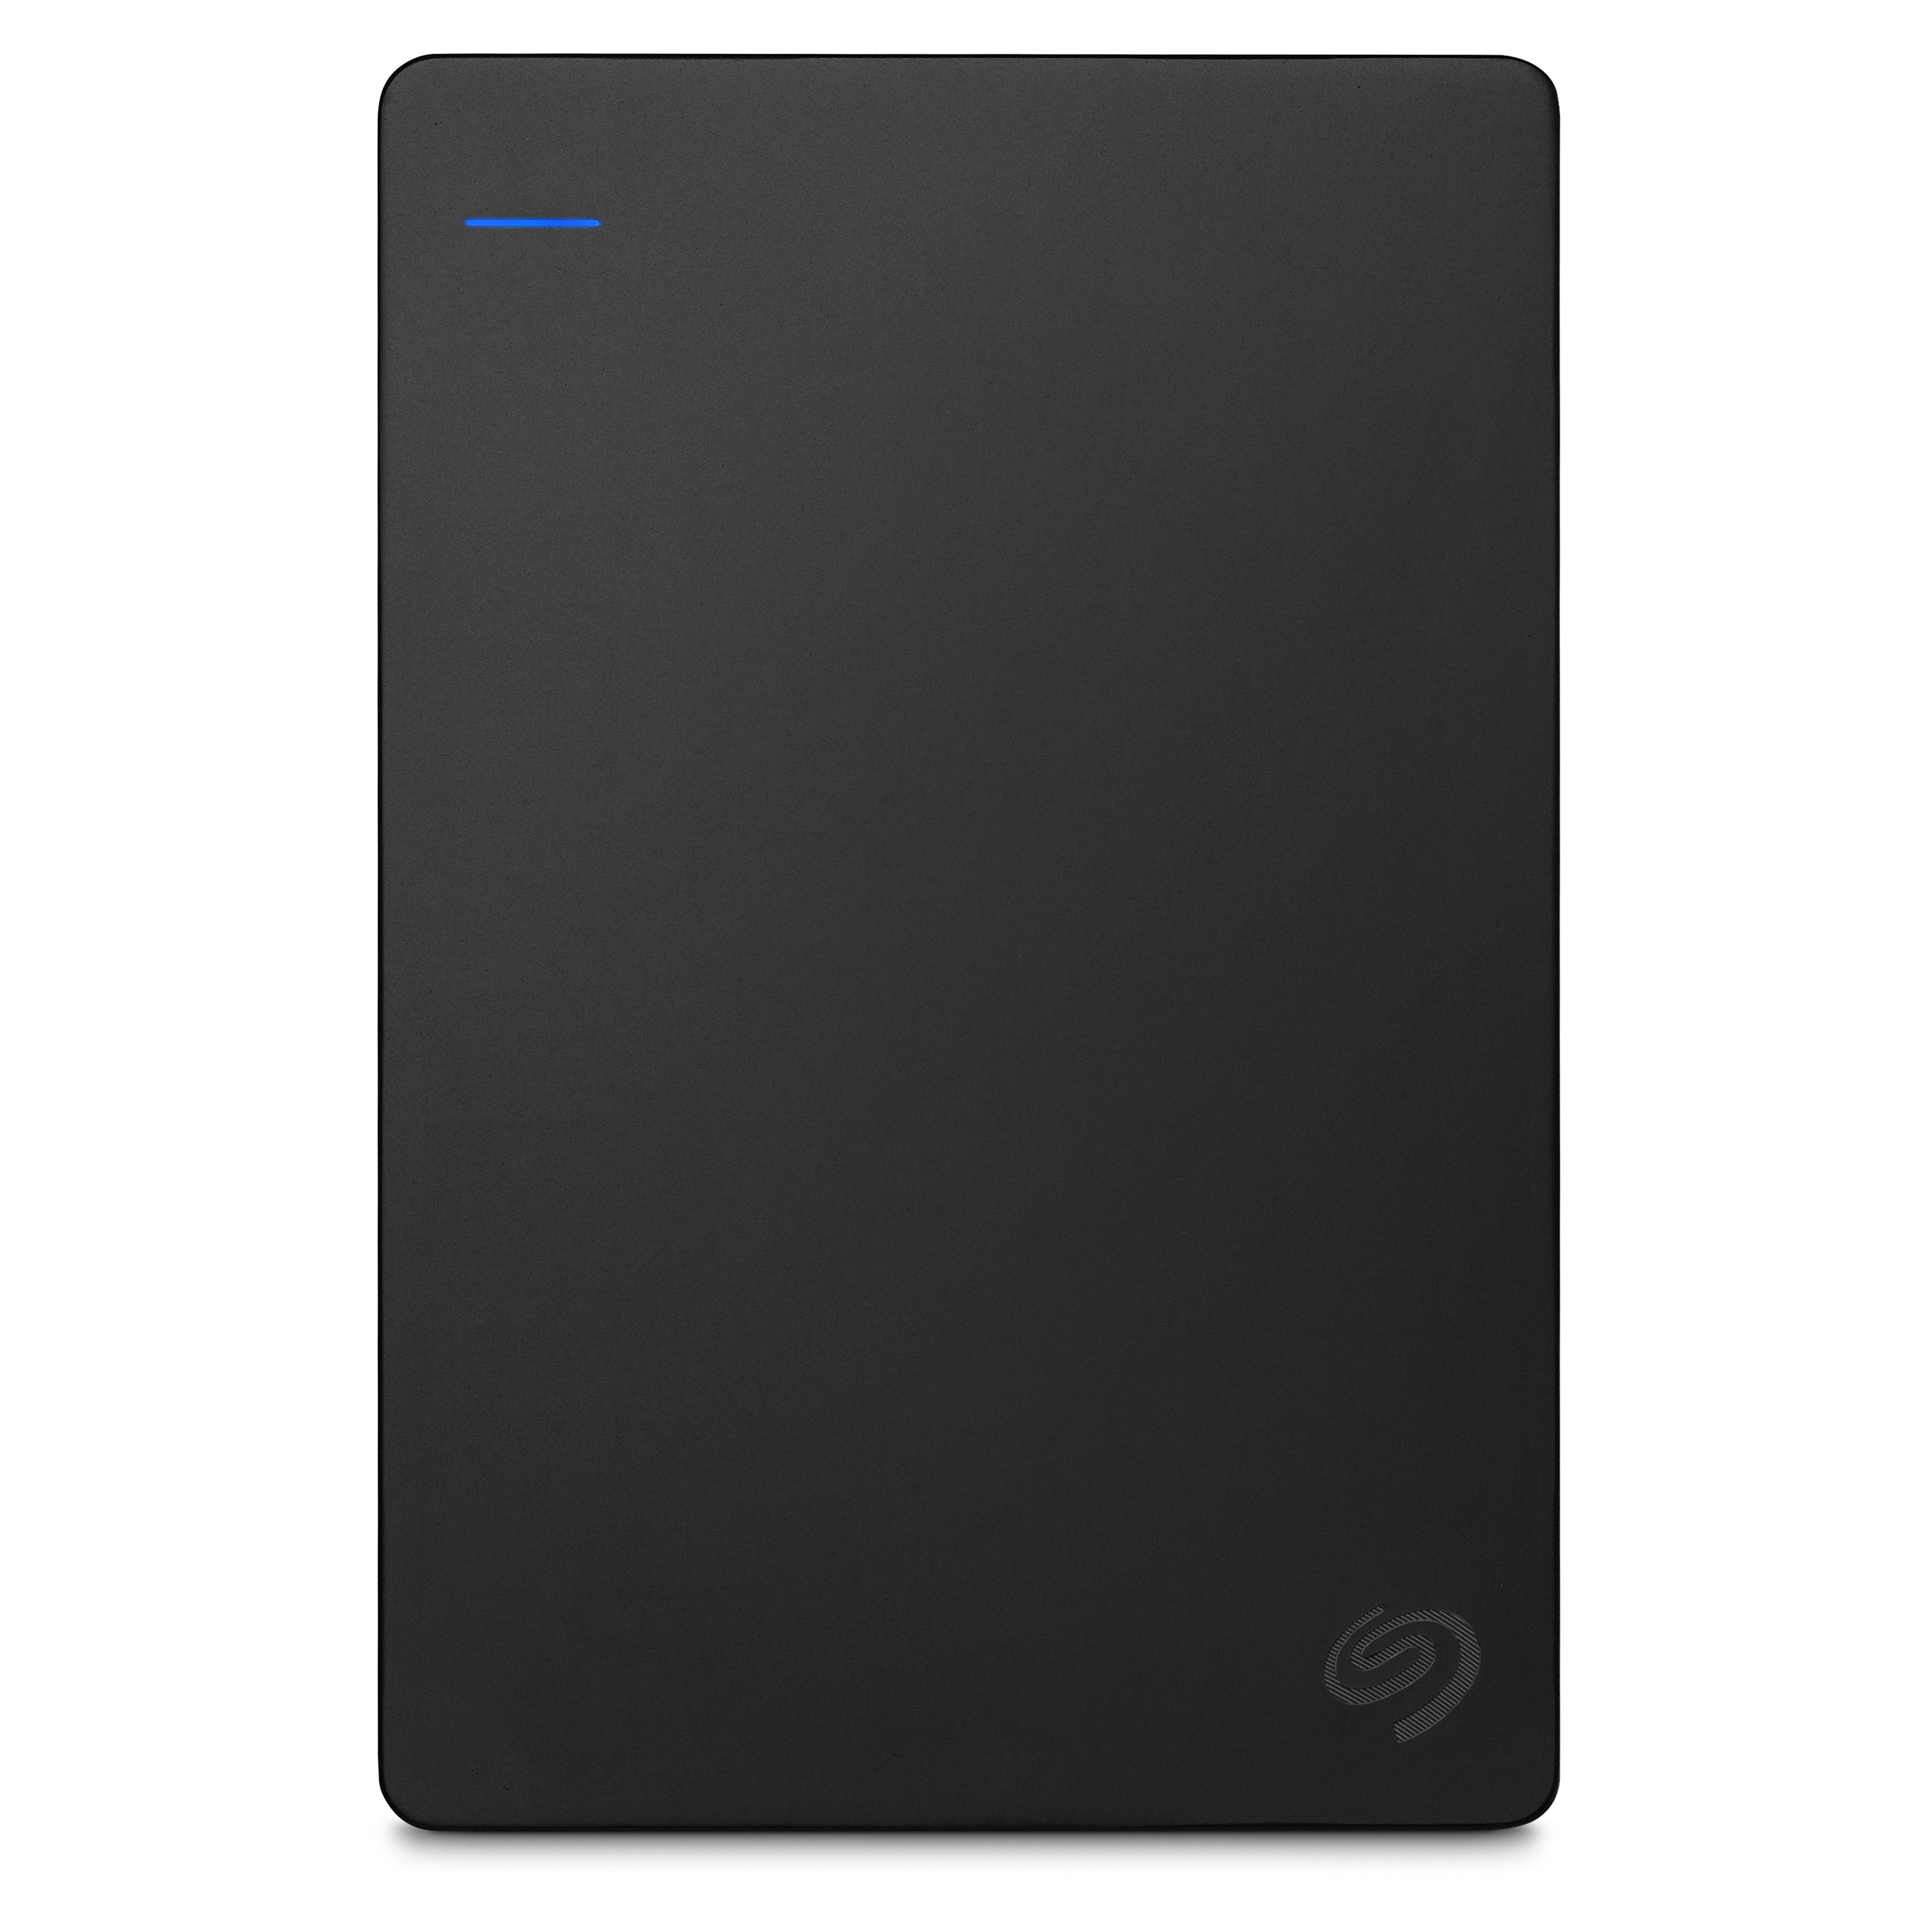 Seagate Game Drive for PlayStation 4TB External Hard Drive Portable-USB 3.0 (Black) - image 3 of 11